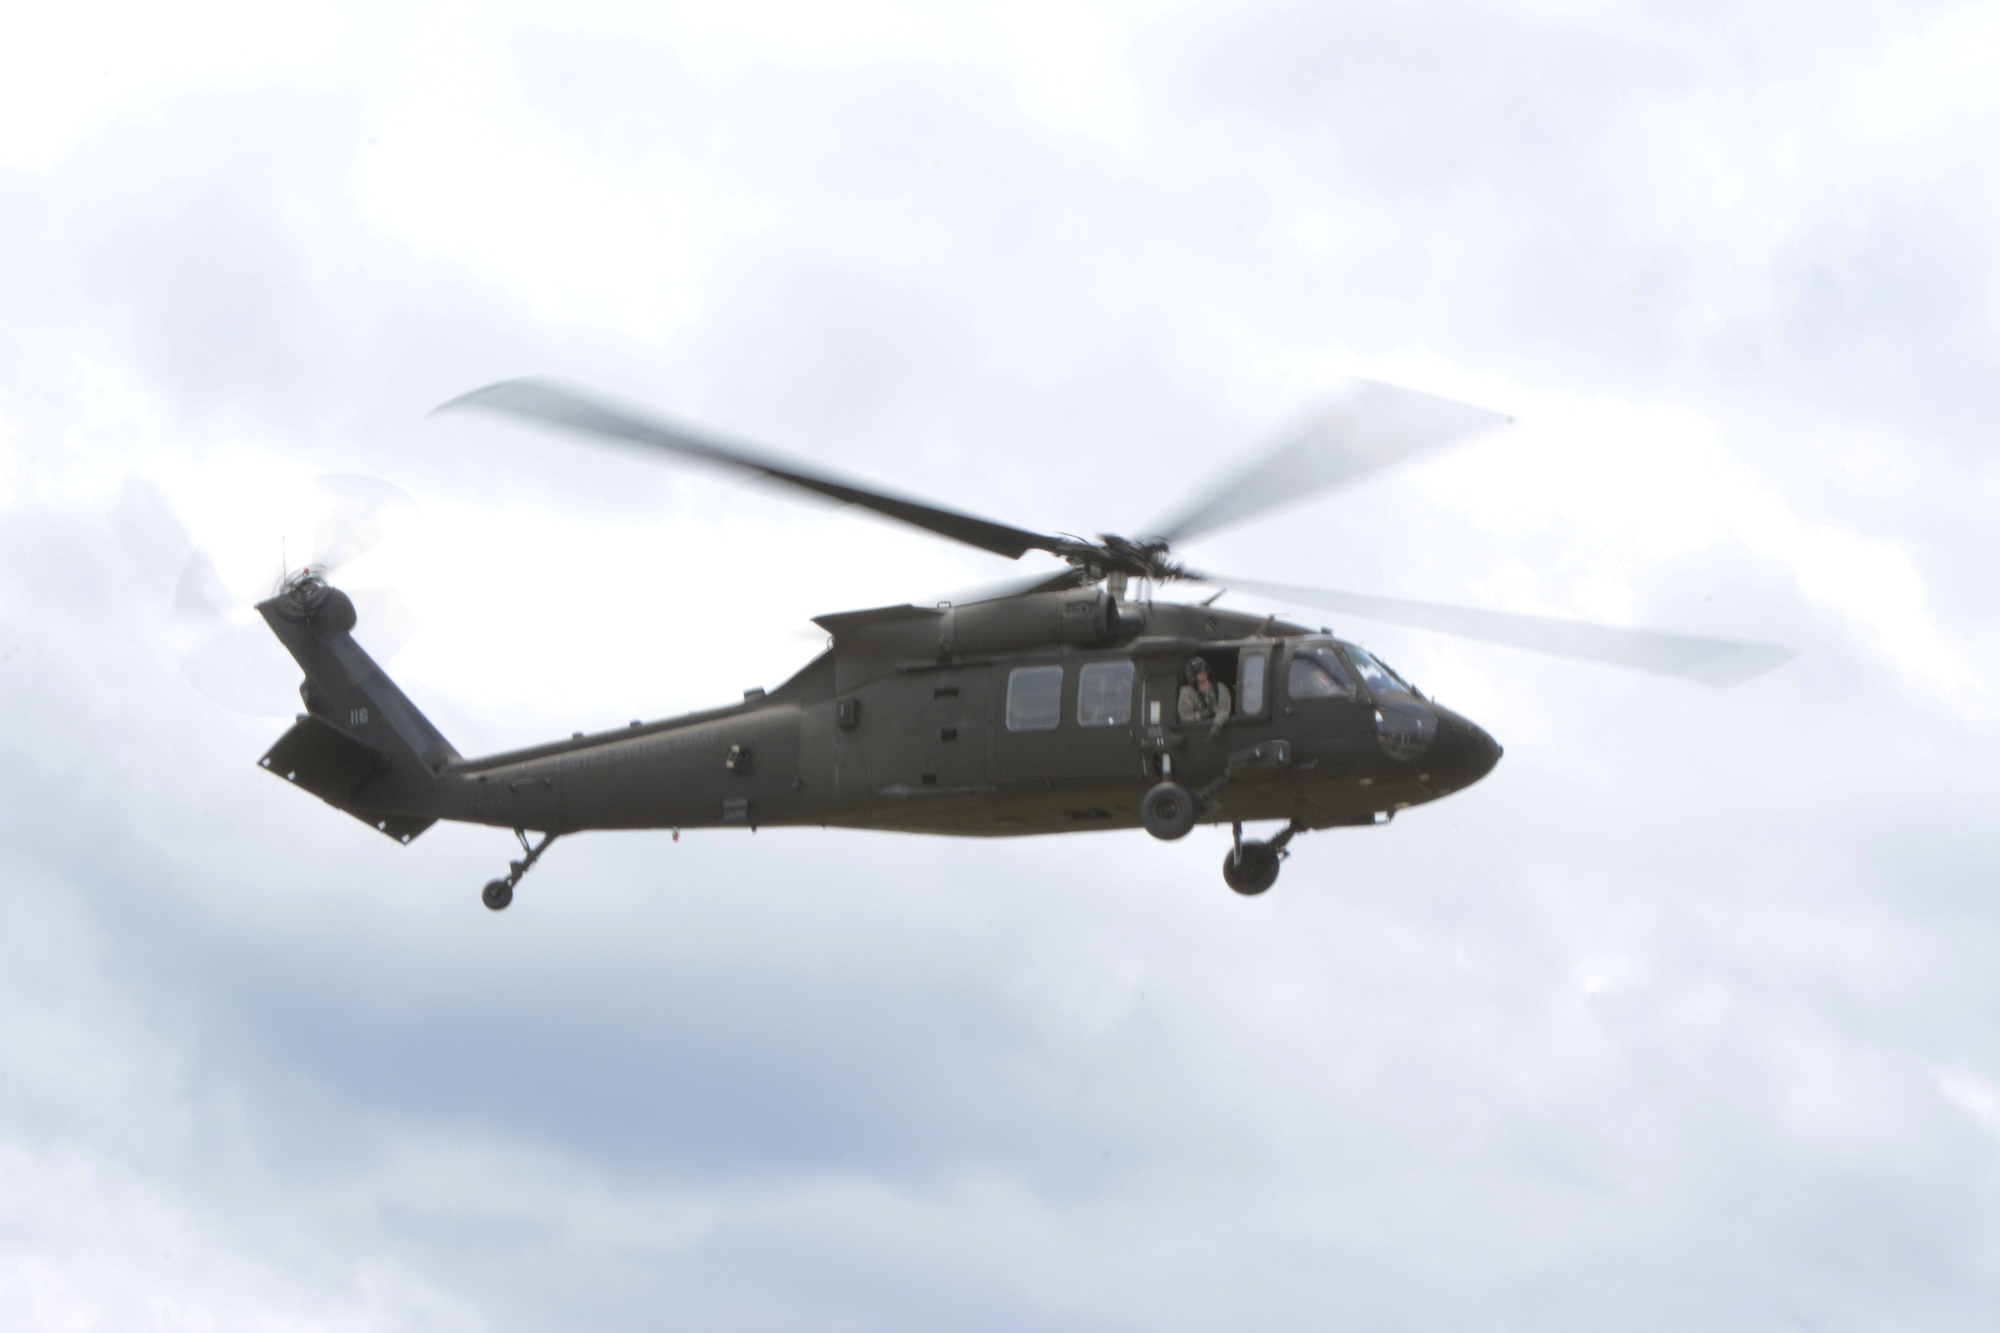 A UH-60 Black Hawk circles above the Sunnyview Exposition Center during the 2014 State Interoperable Mobile Communications Exercise in Oshkosh, Wis., May 15, 2014. The UH-60 Black Hawk was used to test air-to-ground communications. (Air National Guard photo by Senior Airman Andrea F. Liechti)